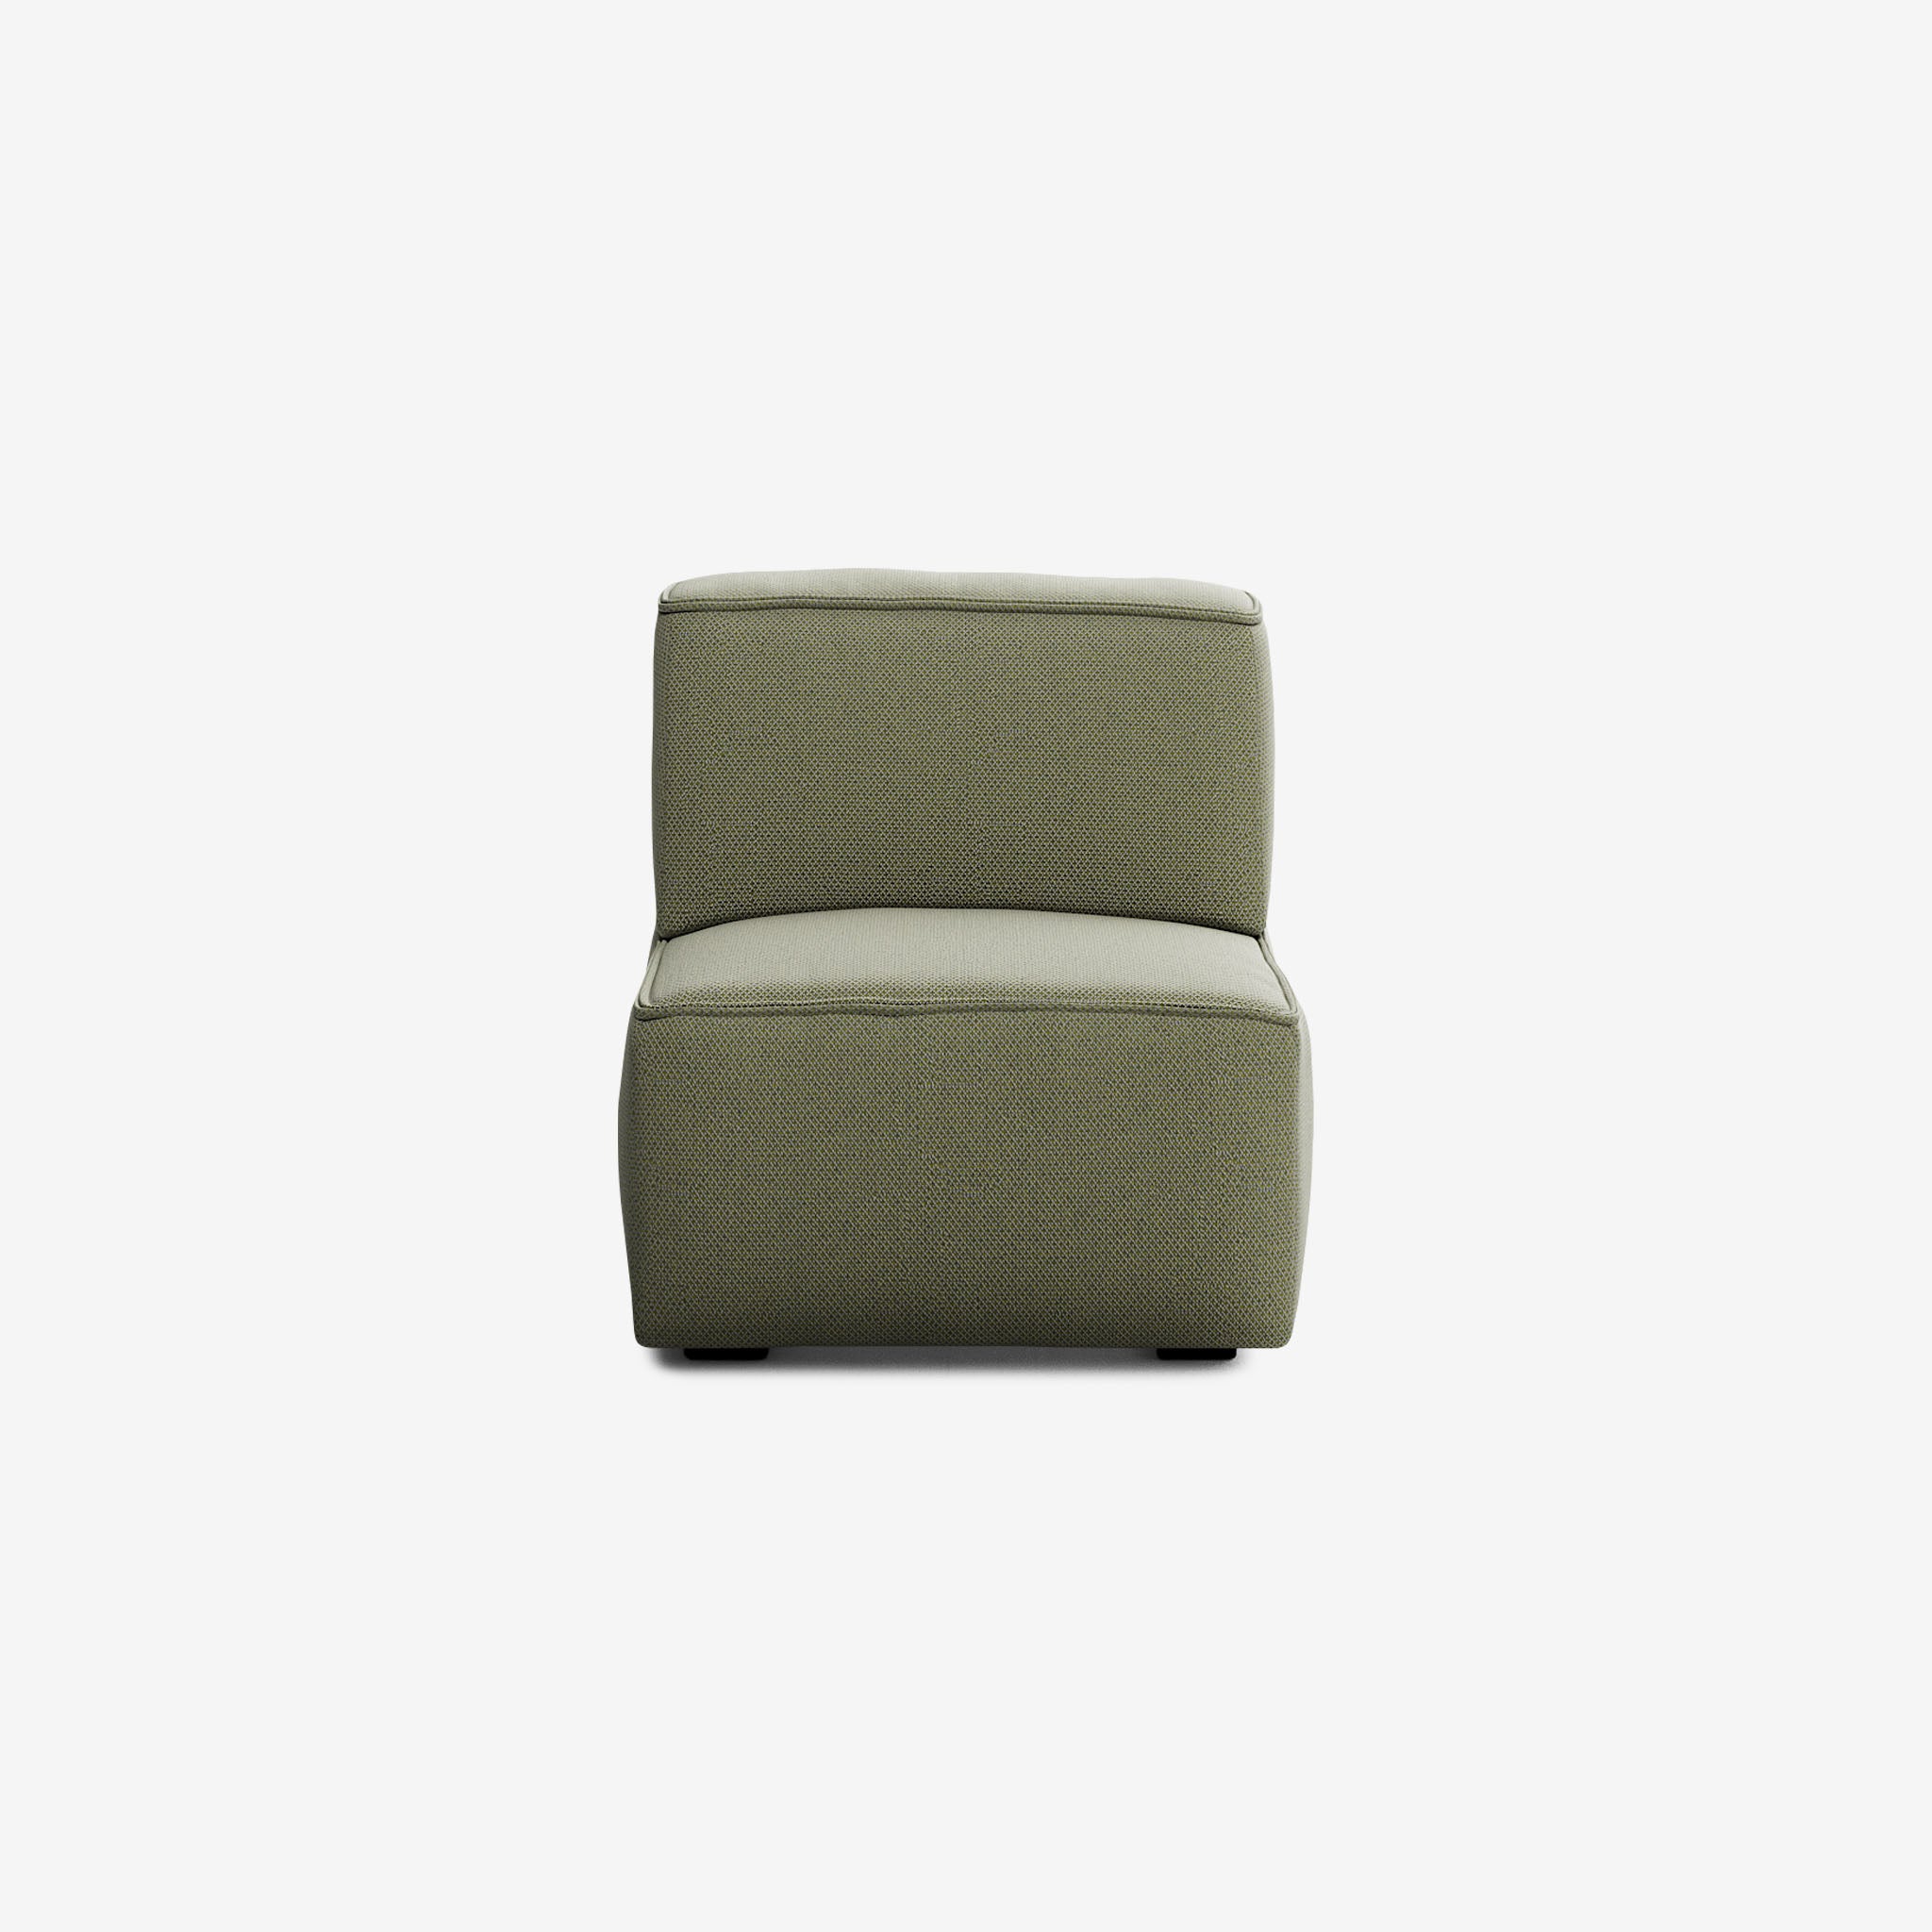 Meester Sofa 1 Seater